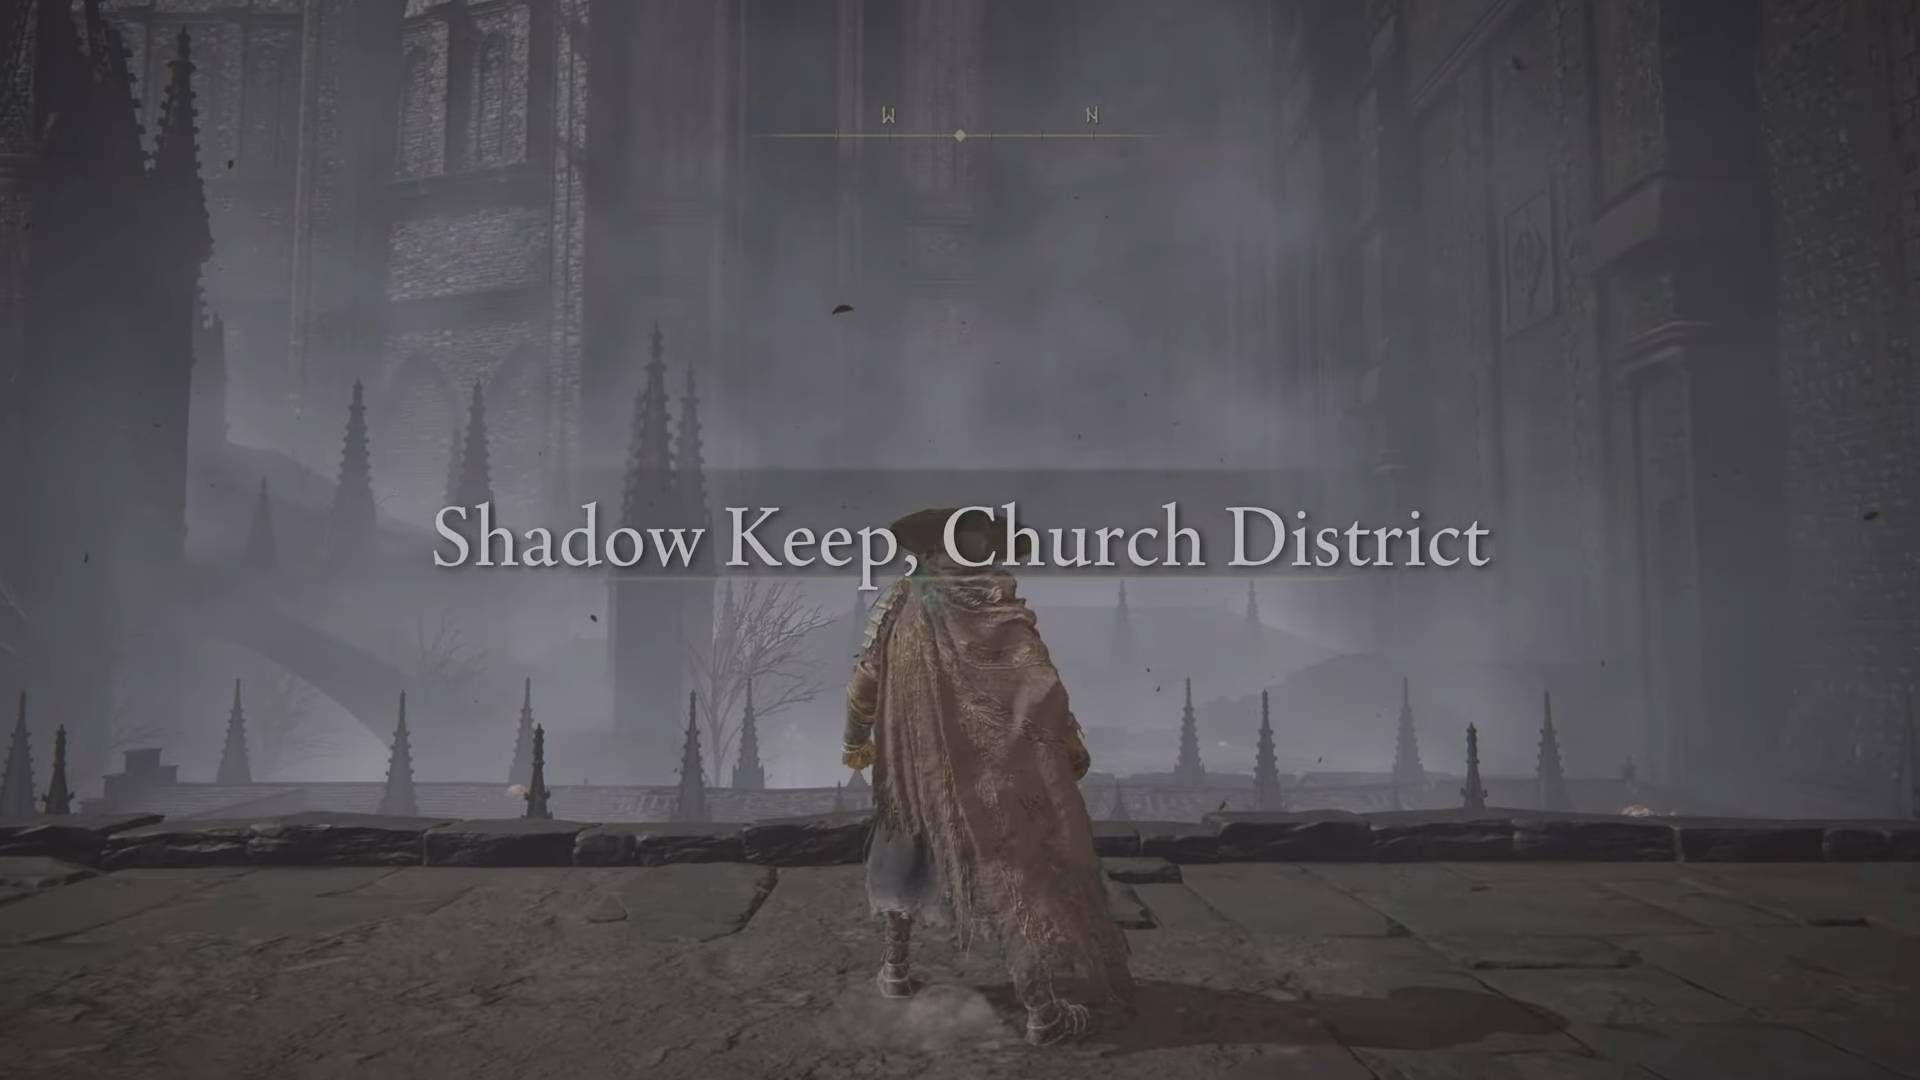 The Shadow Keep, Church District in Elden Ring